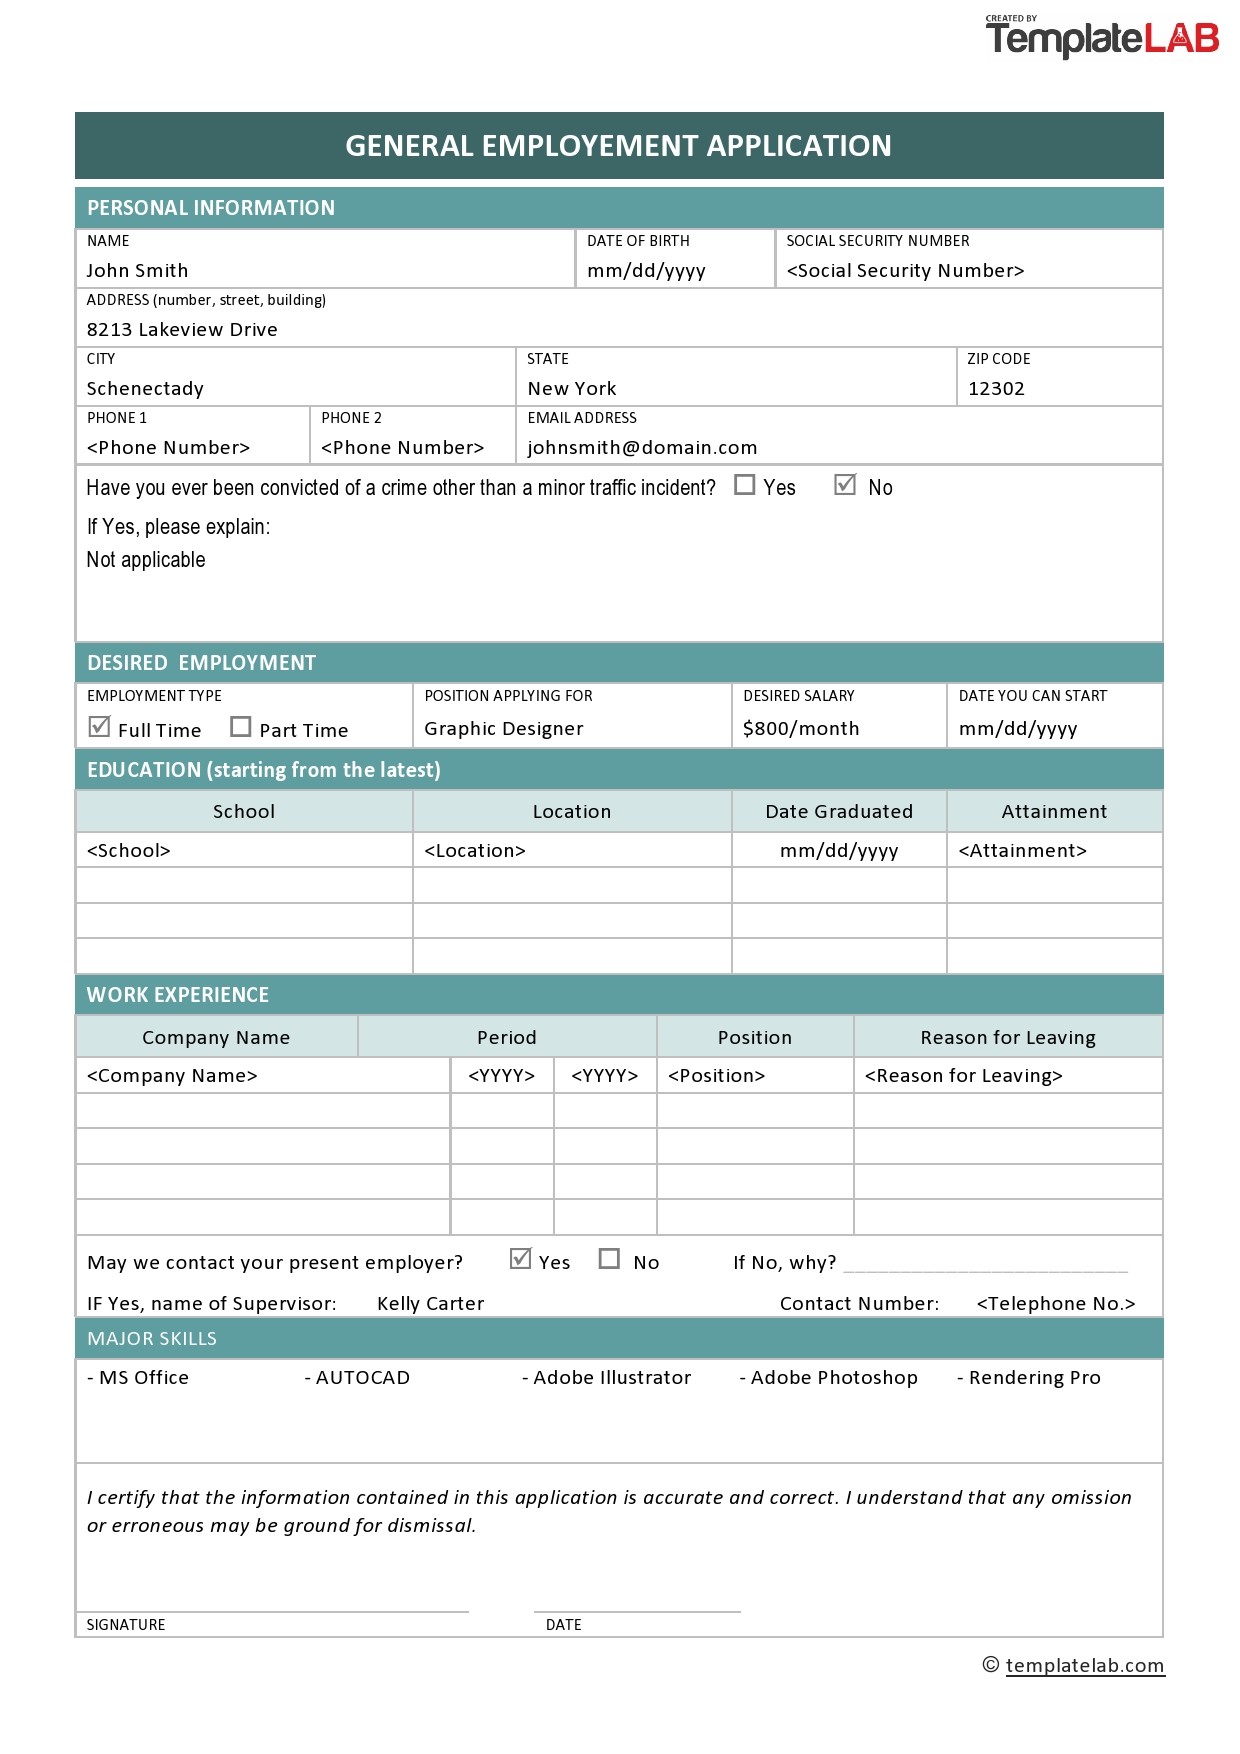 Free General Employment Application Template - TemplateLab